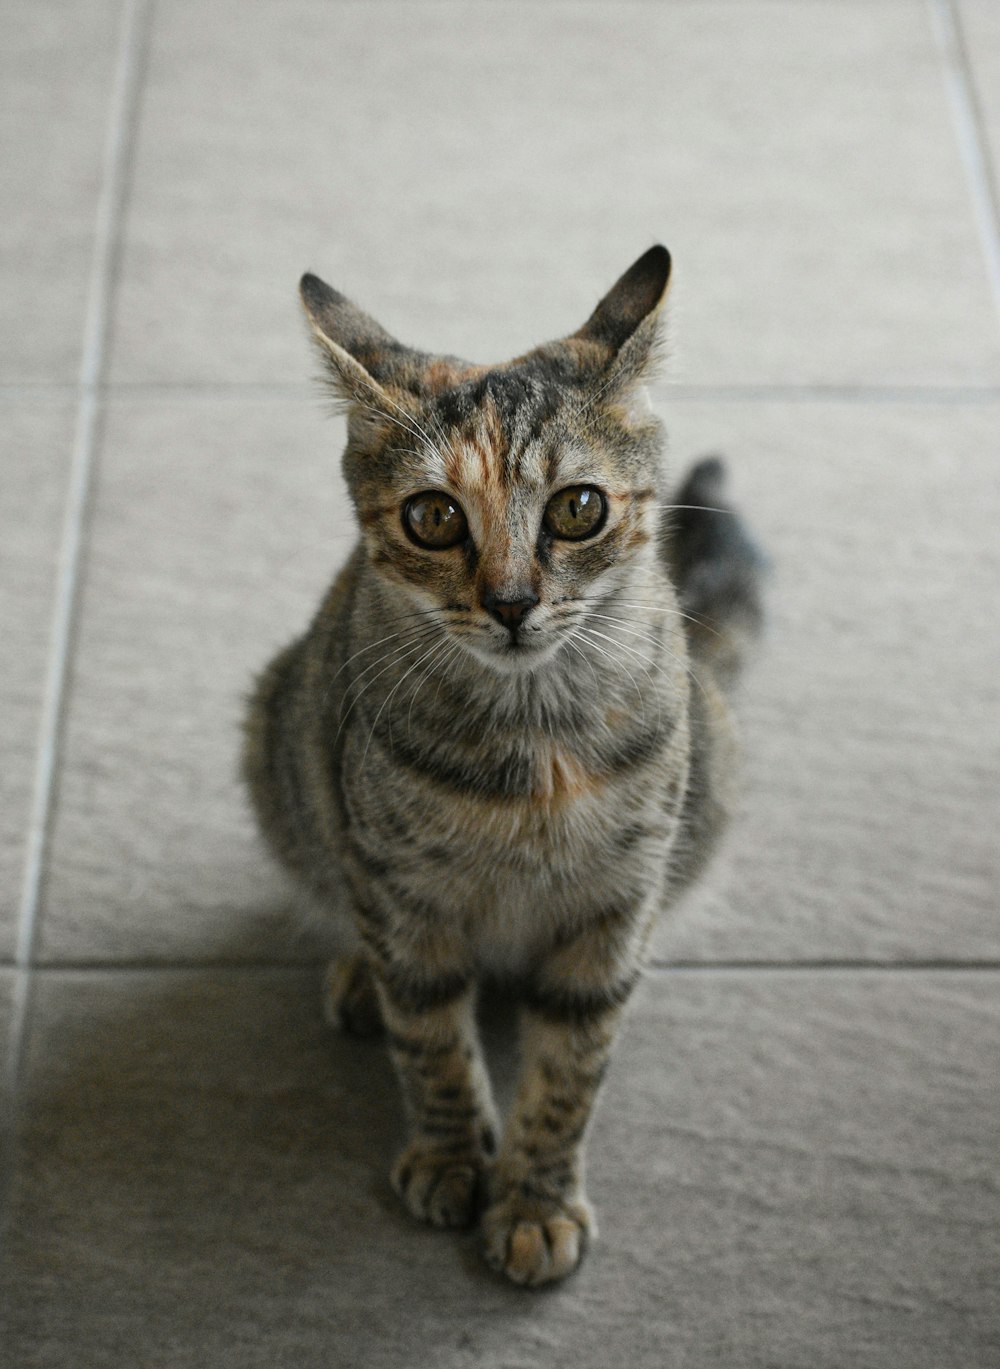 a cat sitting on a tile floor looking at the camera